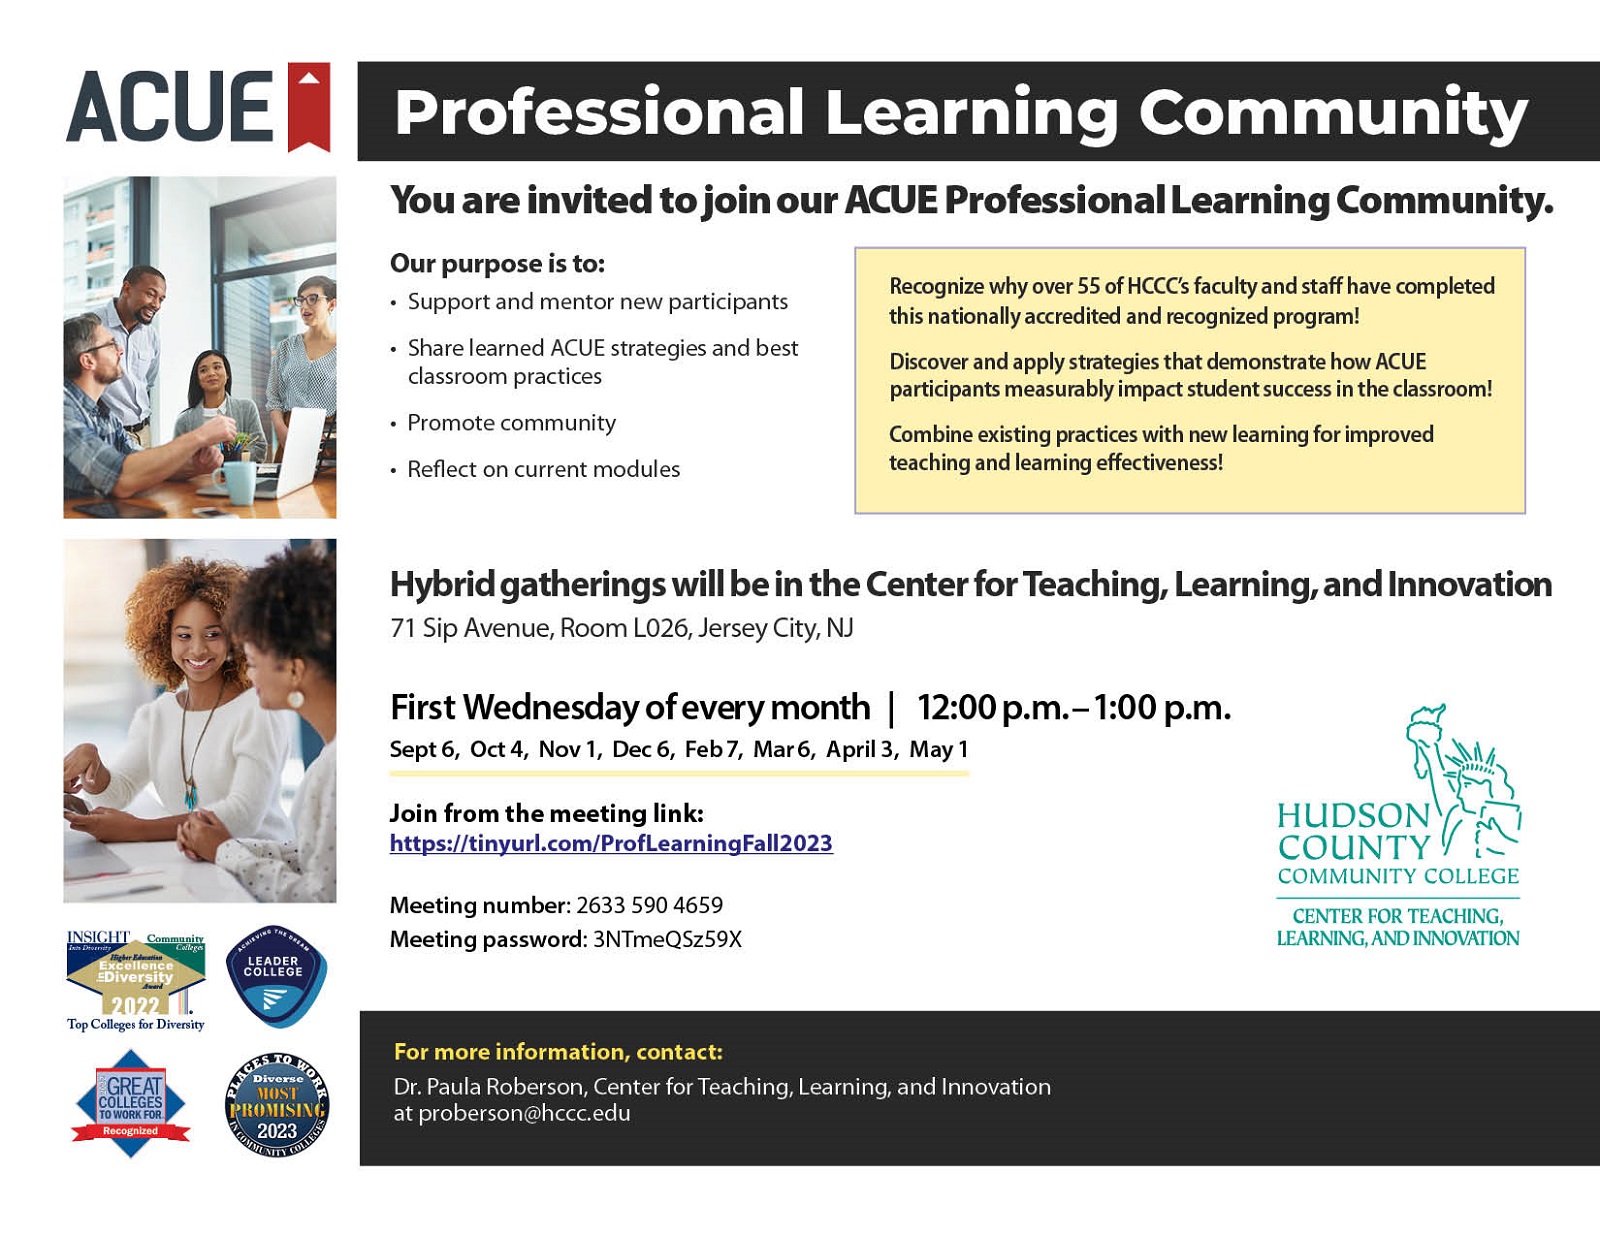 ACUE - Professional Learning Community